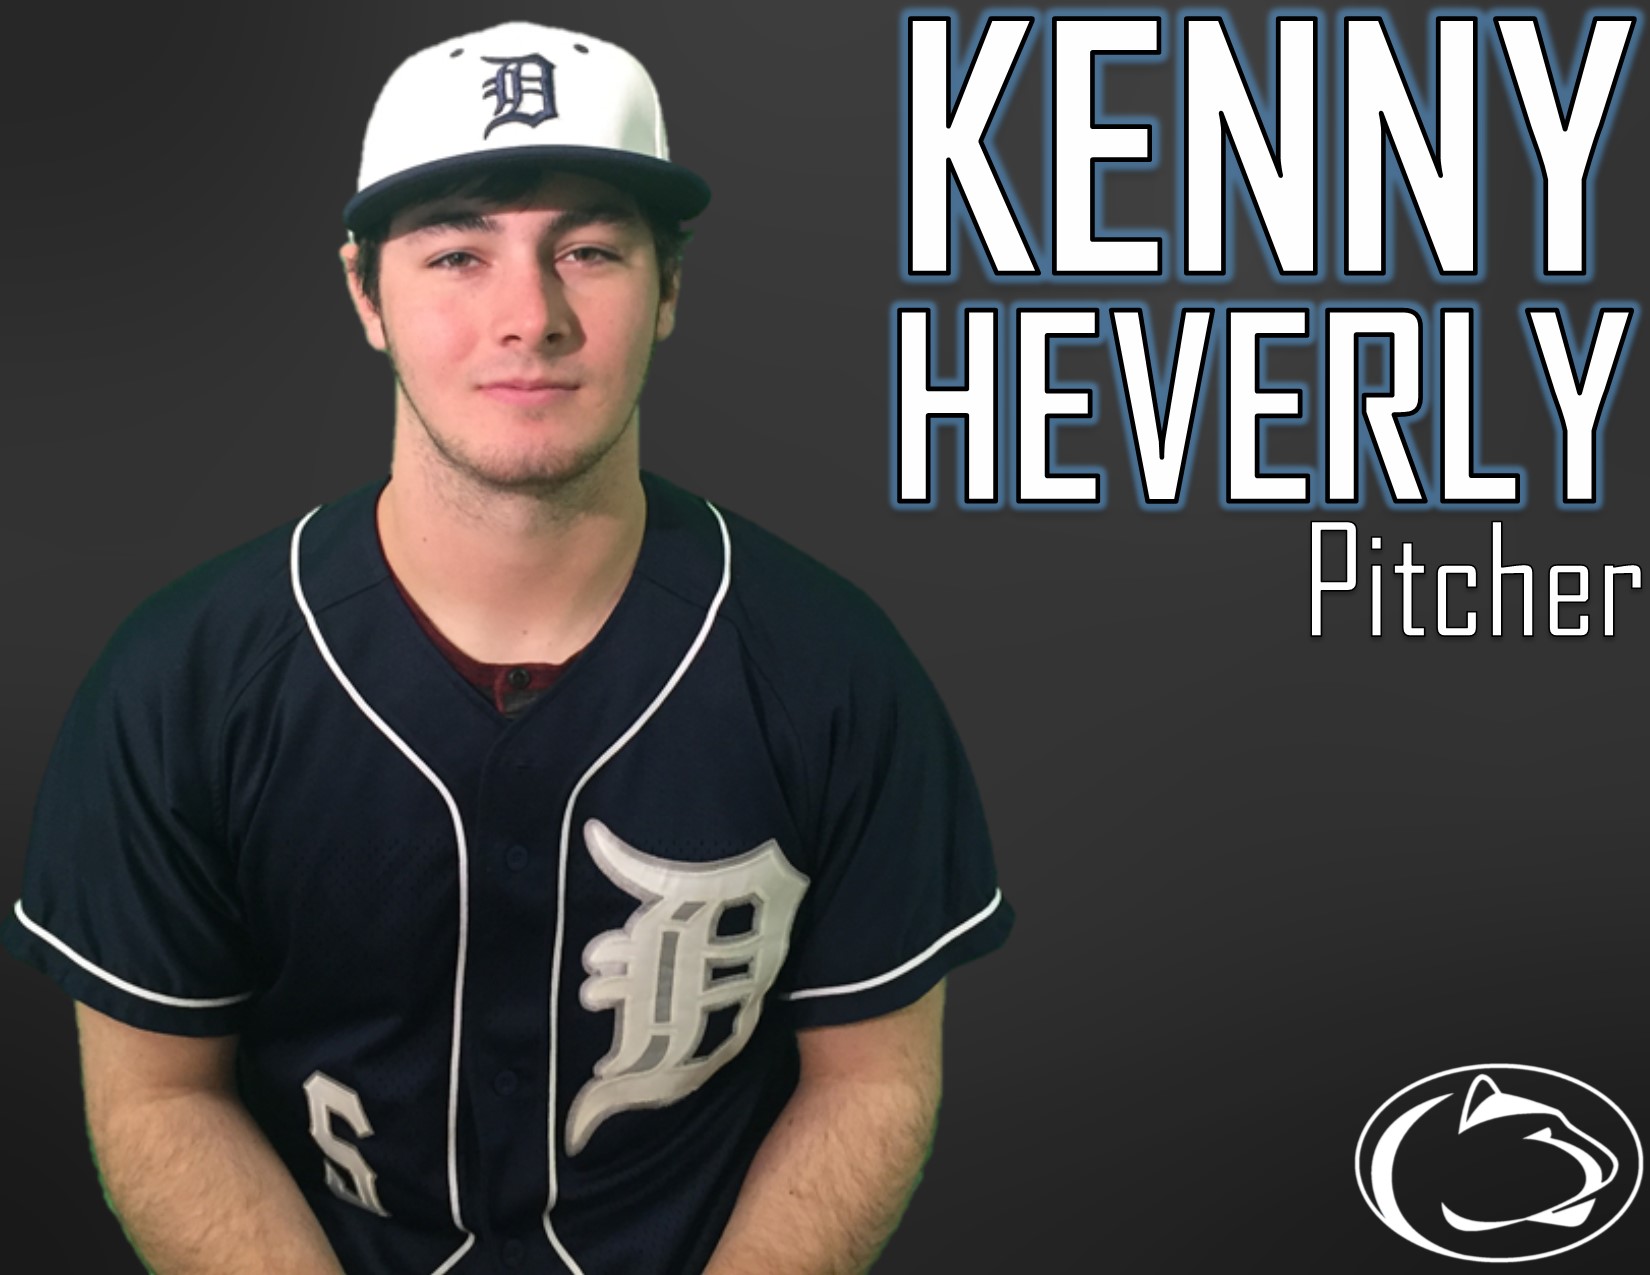 4/4/2016 Baseball Pitcher of the Week: Kenny Heverly